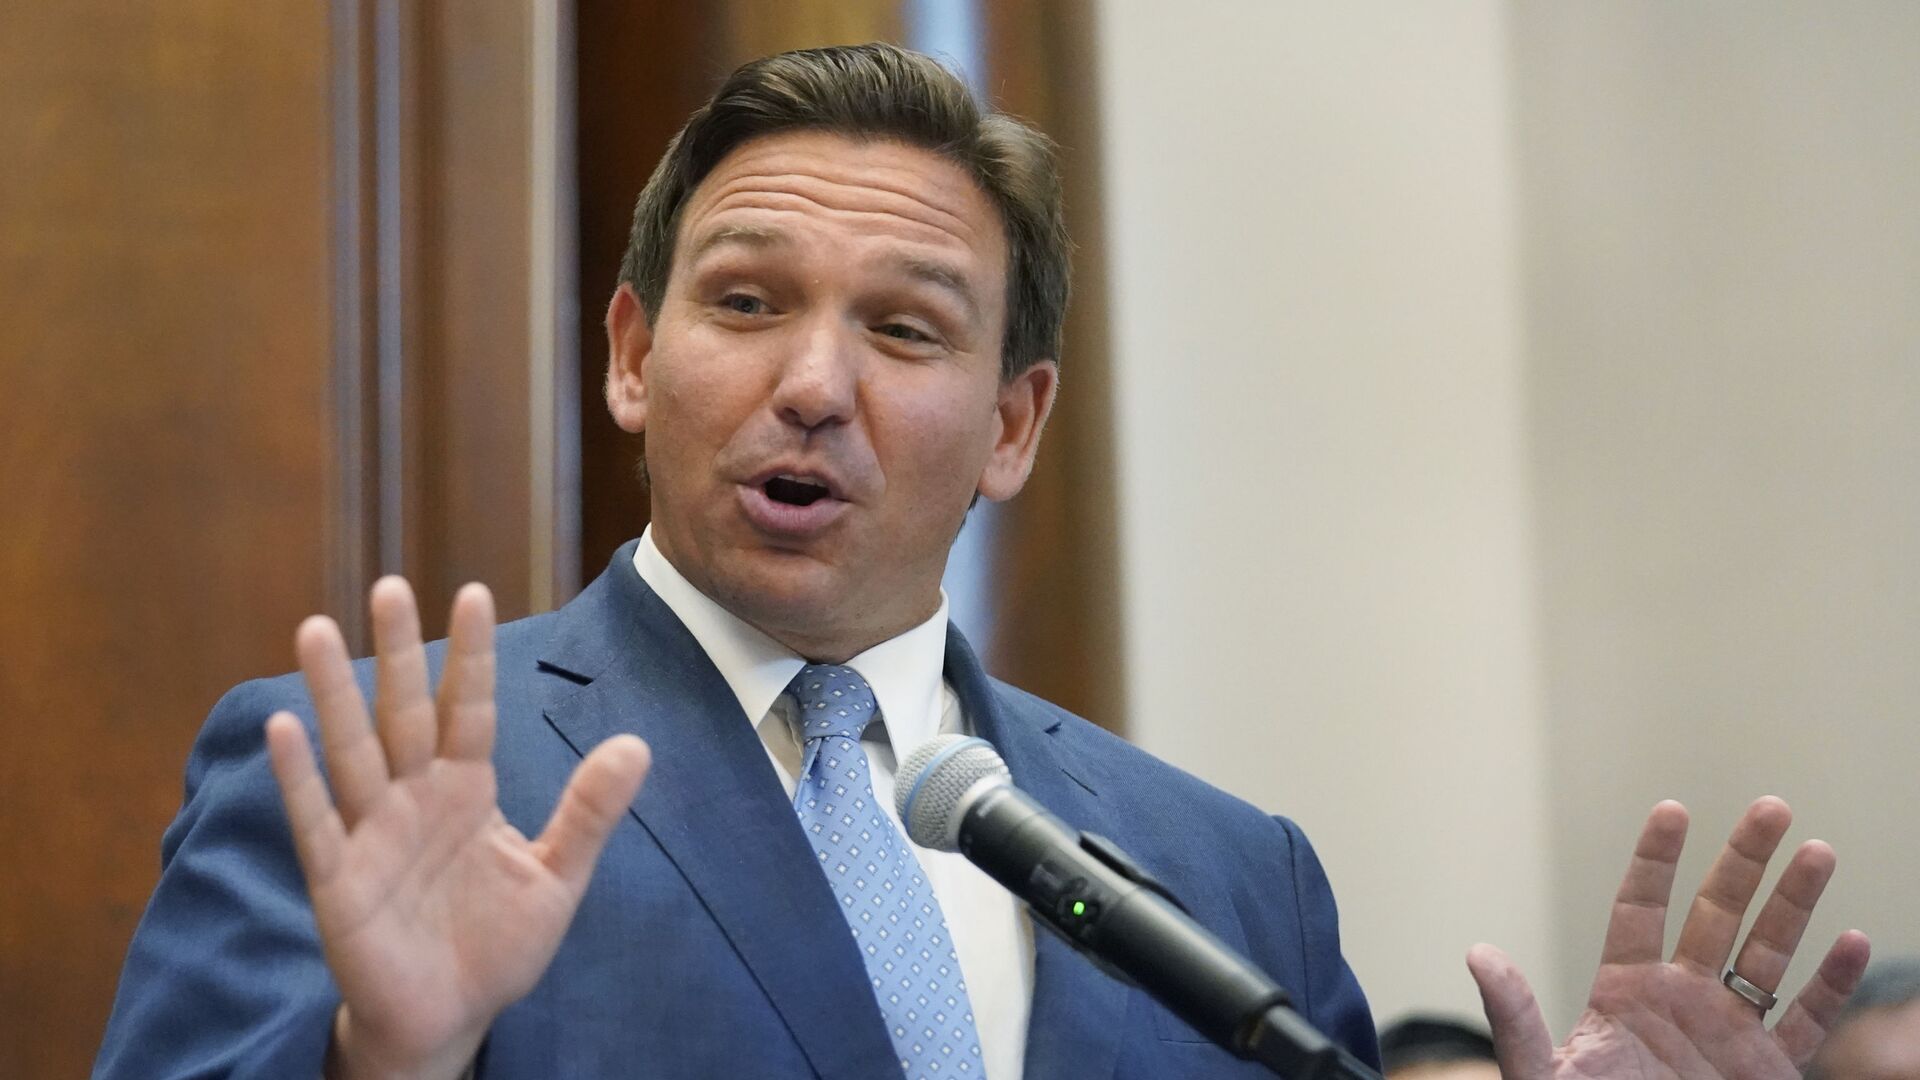 Florida Gov. Ron DeSantis gestures as he speaks, Monday, June 14, 2021, at the Shul of Bal Harbour, a Jewish community center in Surfside, Fla. DeSantis visited the South Florida temple to denounce anti-Semitism and stand with Israel, while signing a bill into law that would require public schools in his state to set aside moments of silence for children to meditate or pray - Sputnik International, 1920, 05.08.2021